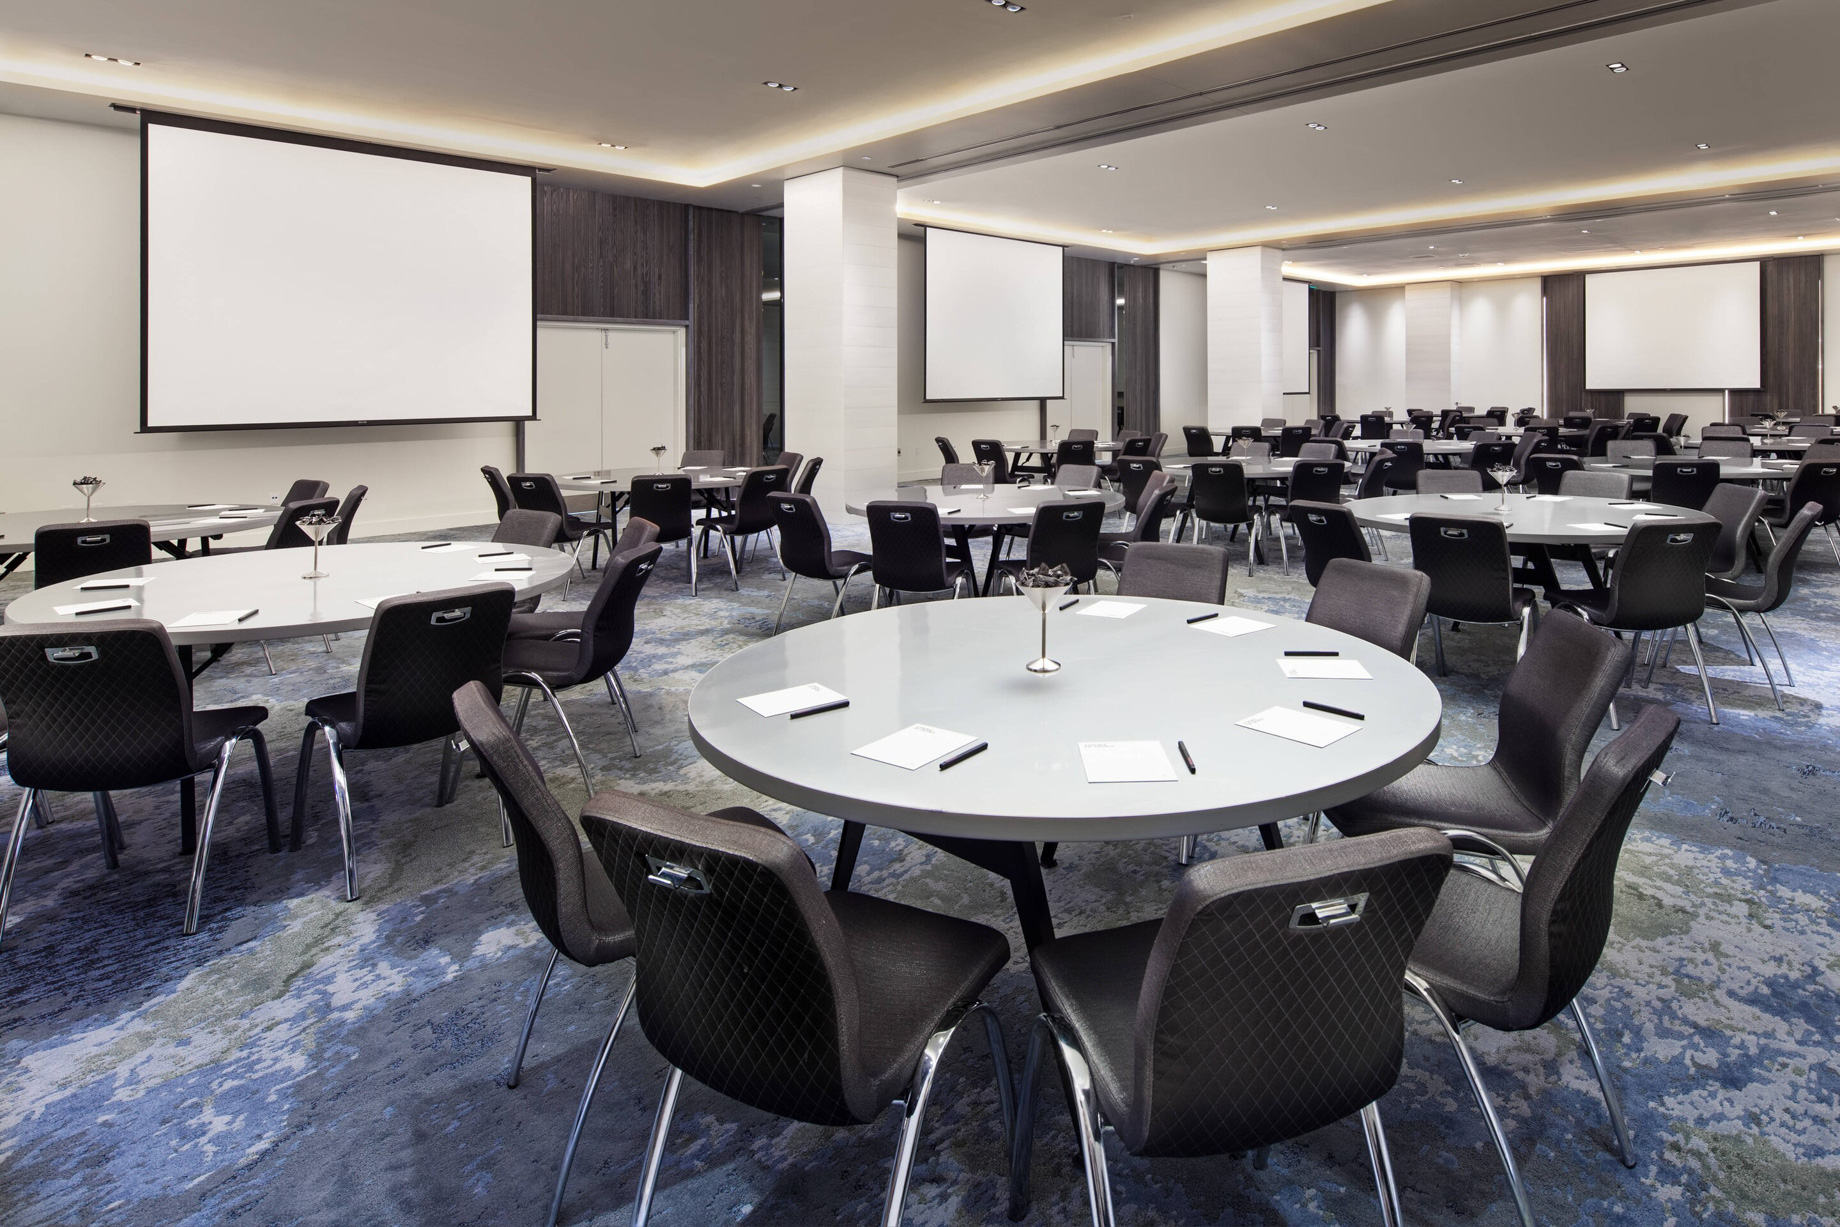 W Fort Lauderdale Hotel – Fort Lauderdale, FL, USA – Mingle Meeting Room Rounds Setup